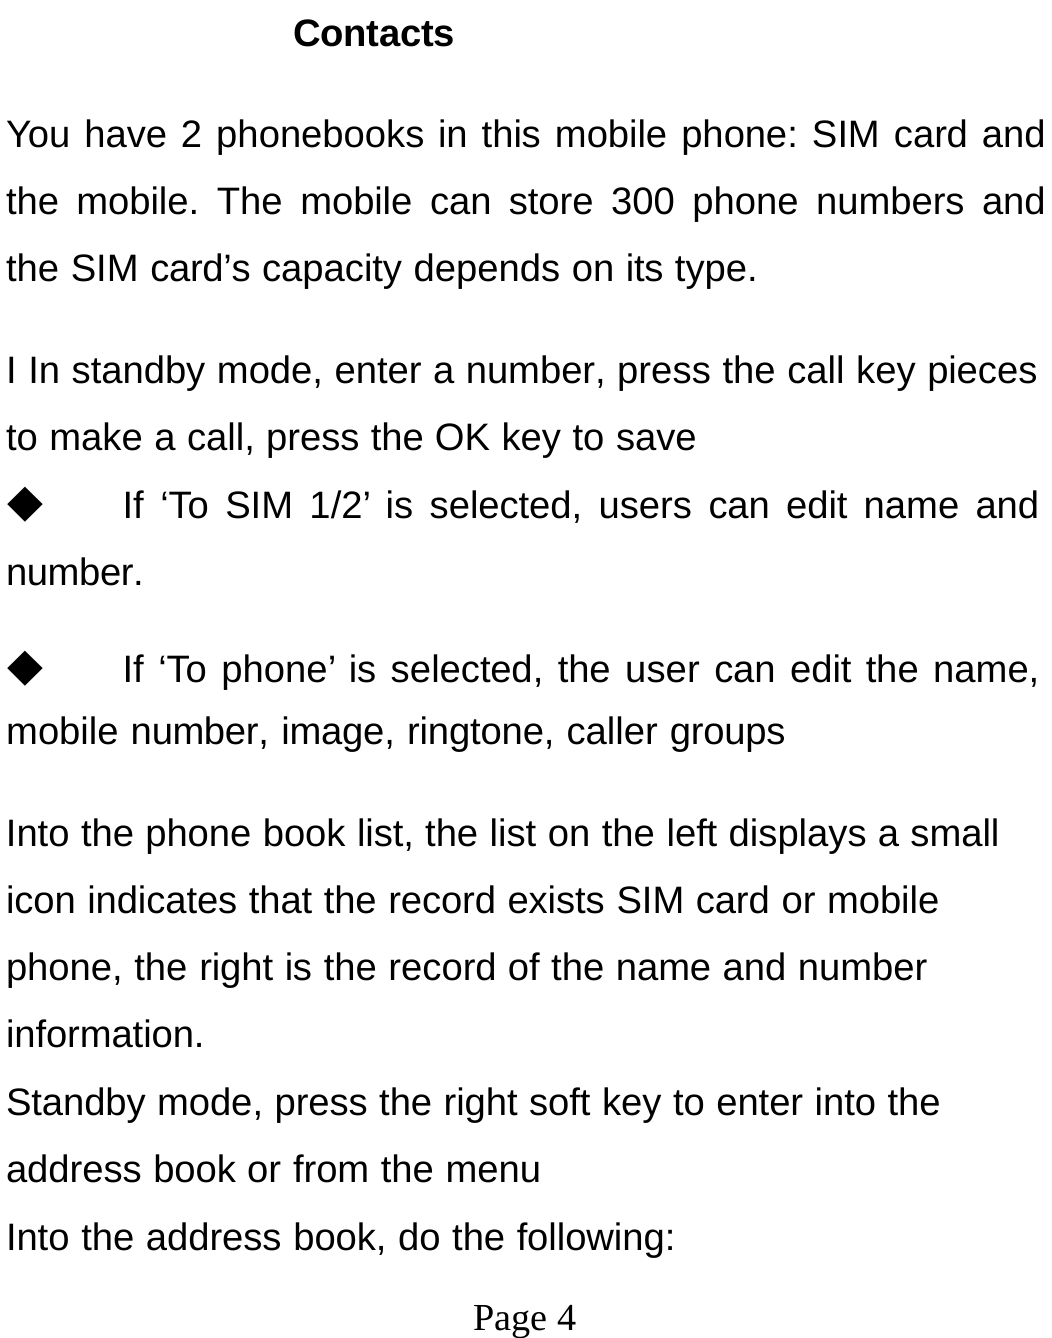 Page 4Contacts You have 2 phonebooks in this mobile phone: SIM card and the mobile. The mobile can store 300 phone numbers and the SIM card’s capacity depends on its type. I In standby mode, enter a number, press the call key pieces to make a call, press the OK key to save ◆ If ‘To SIM 1/2’ is selected, users can edit name and number. ◆ If ‘To phone’ is selected, the user can edit the name, mobile number, image, ringtone, caller groups Into the phone book list, the list on the left displays a small icon indicates that the record exists SIM card or mobile phone, the right is the record of the name and number information. Standby mode, press the right soft key to enter into the address book or from the menu Into the address book, do the following: 